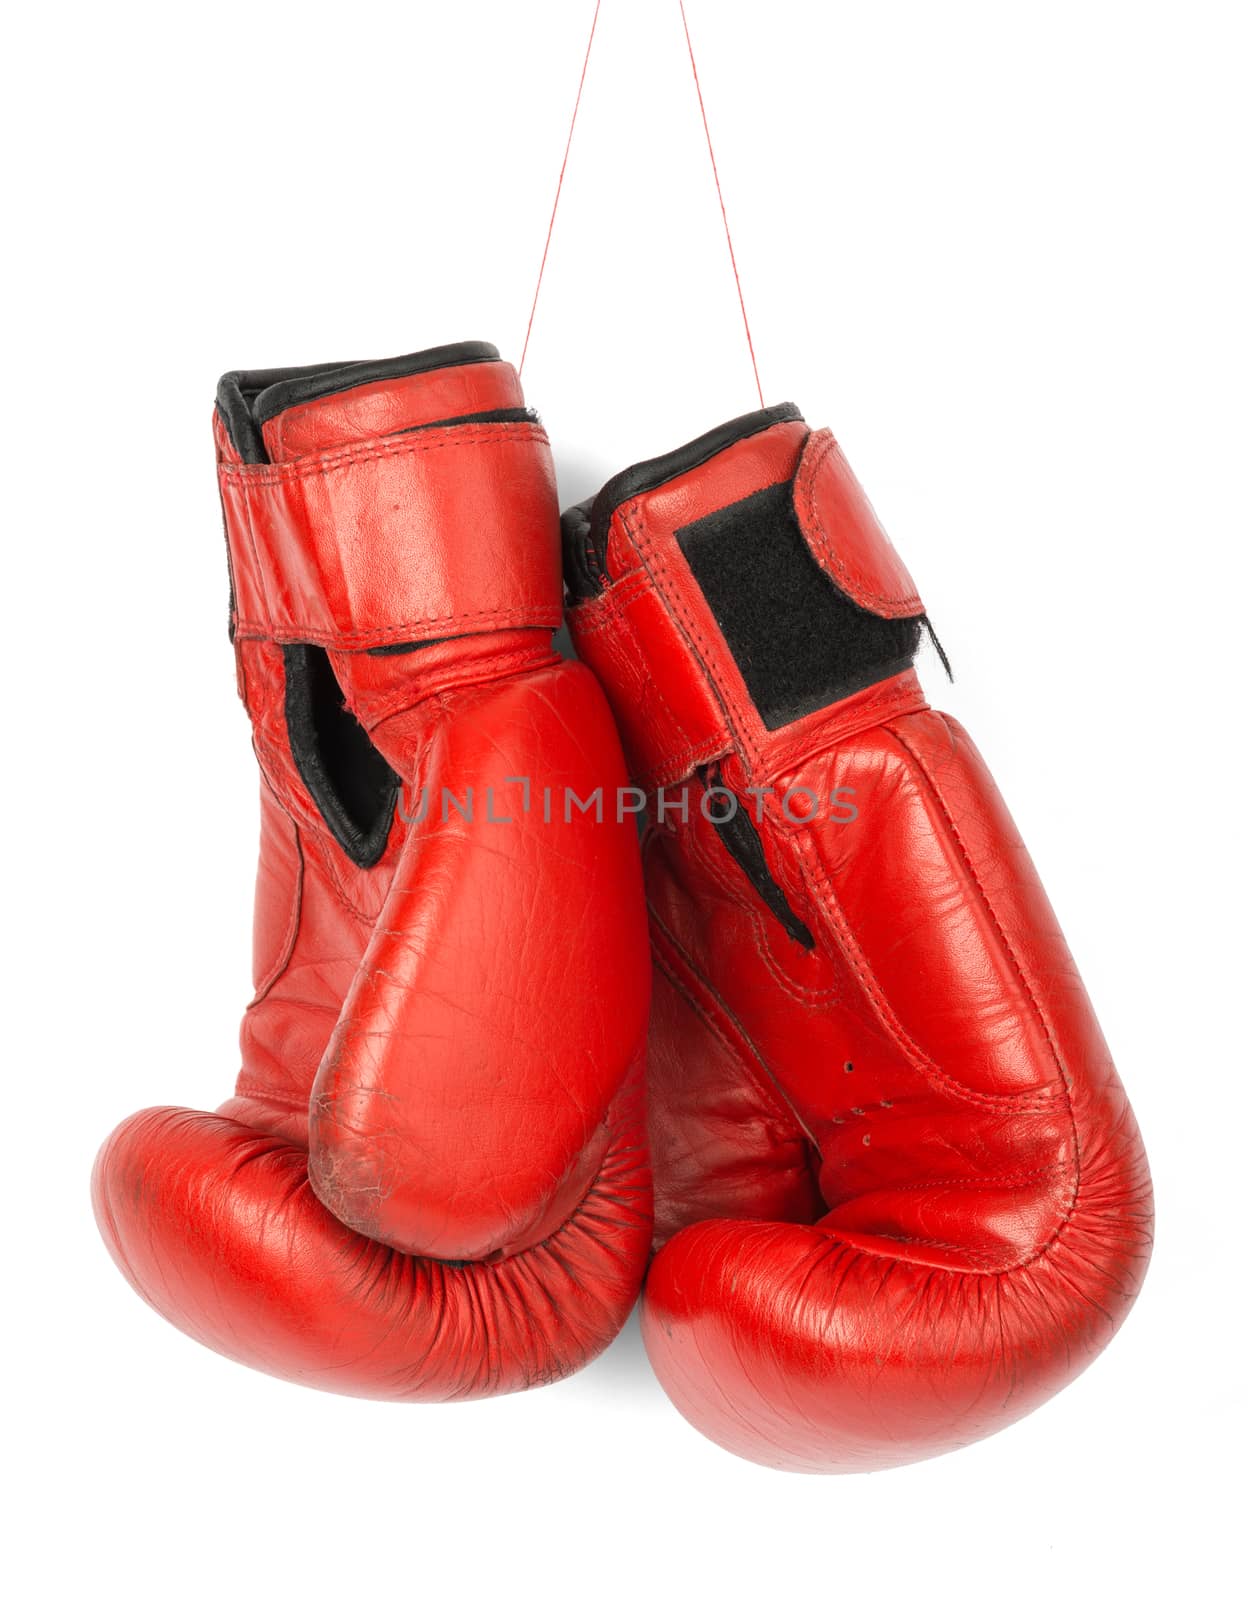 Red boxing gloves on isolated white background